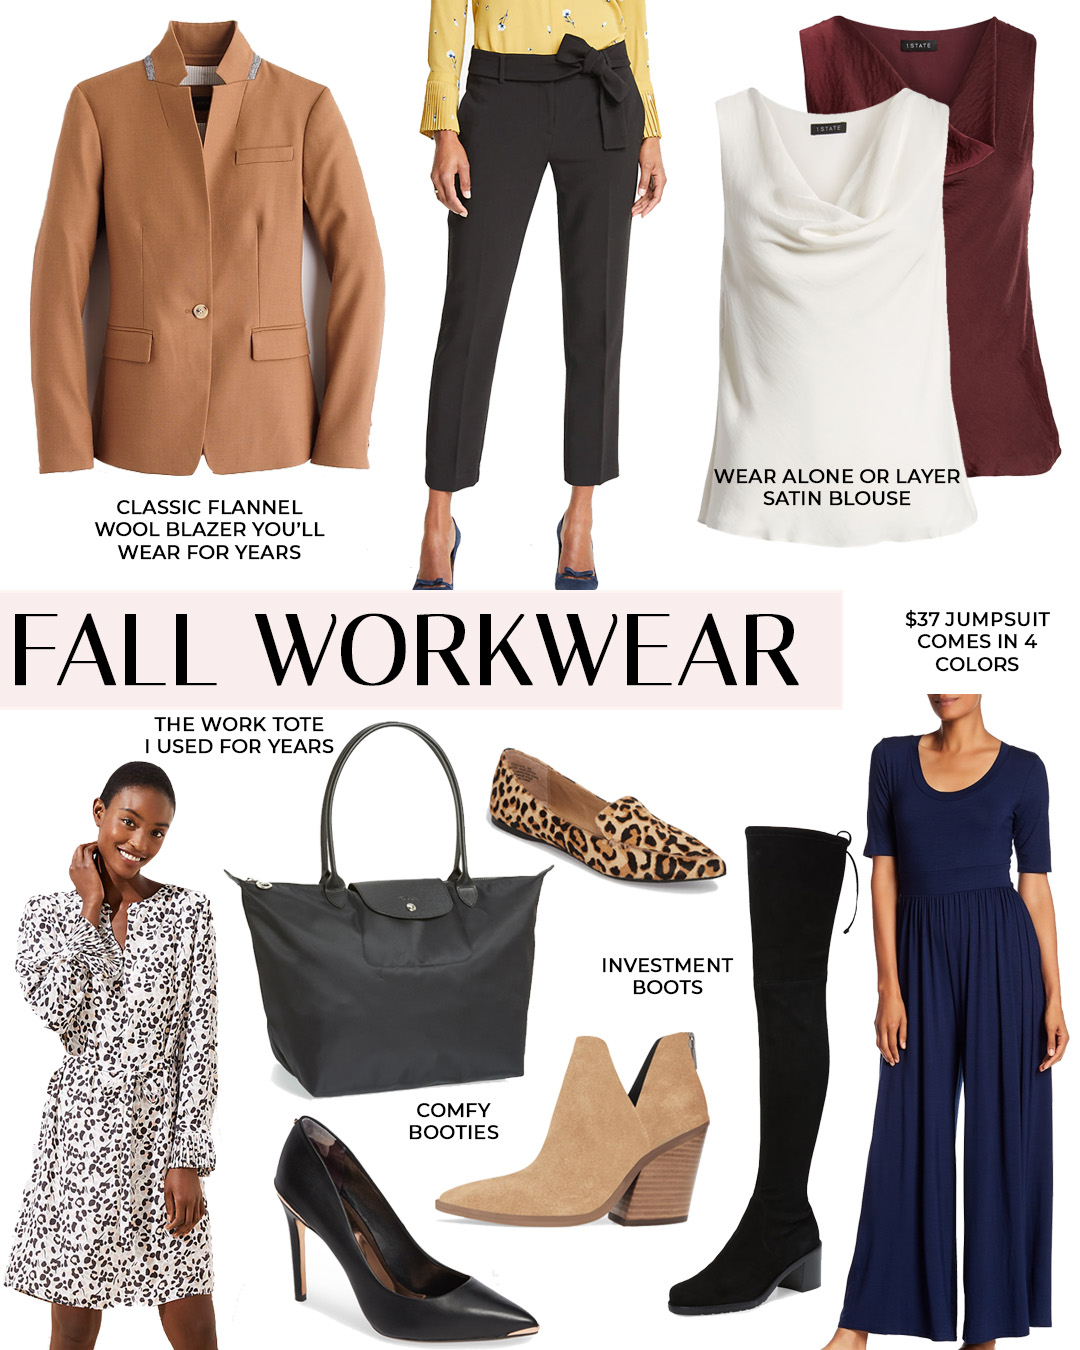 Fall Workwear Staples - Color & Chic